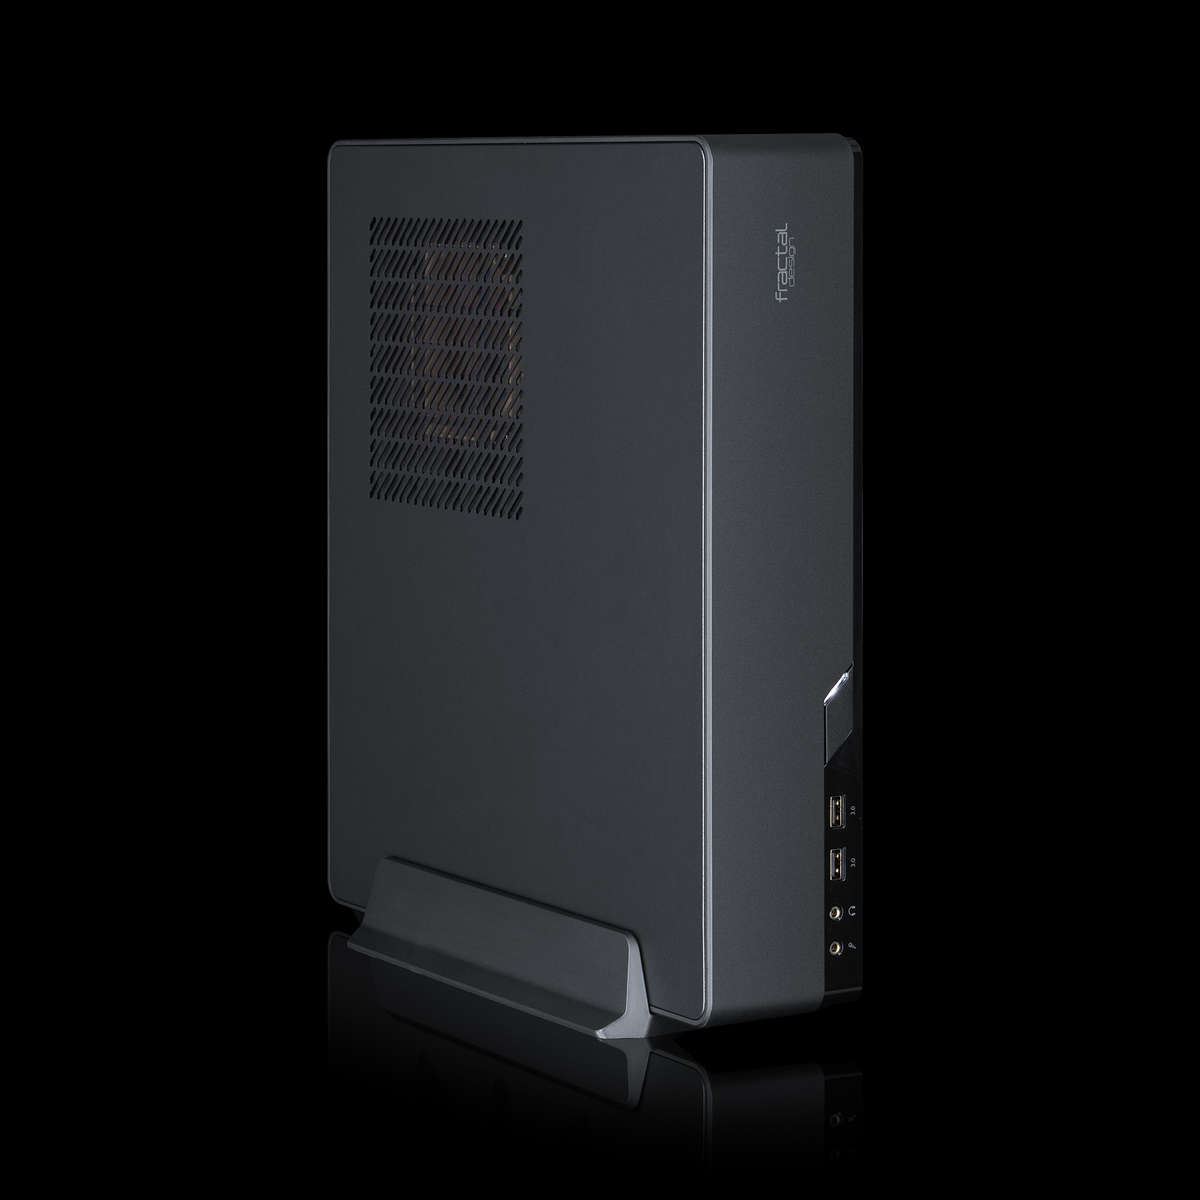 Image of the pre-built Chillblast Fraction Advanced Gaming PC against a dark background. 